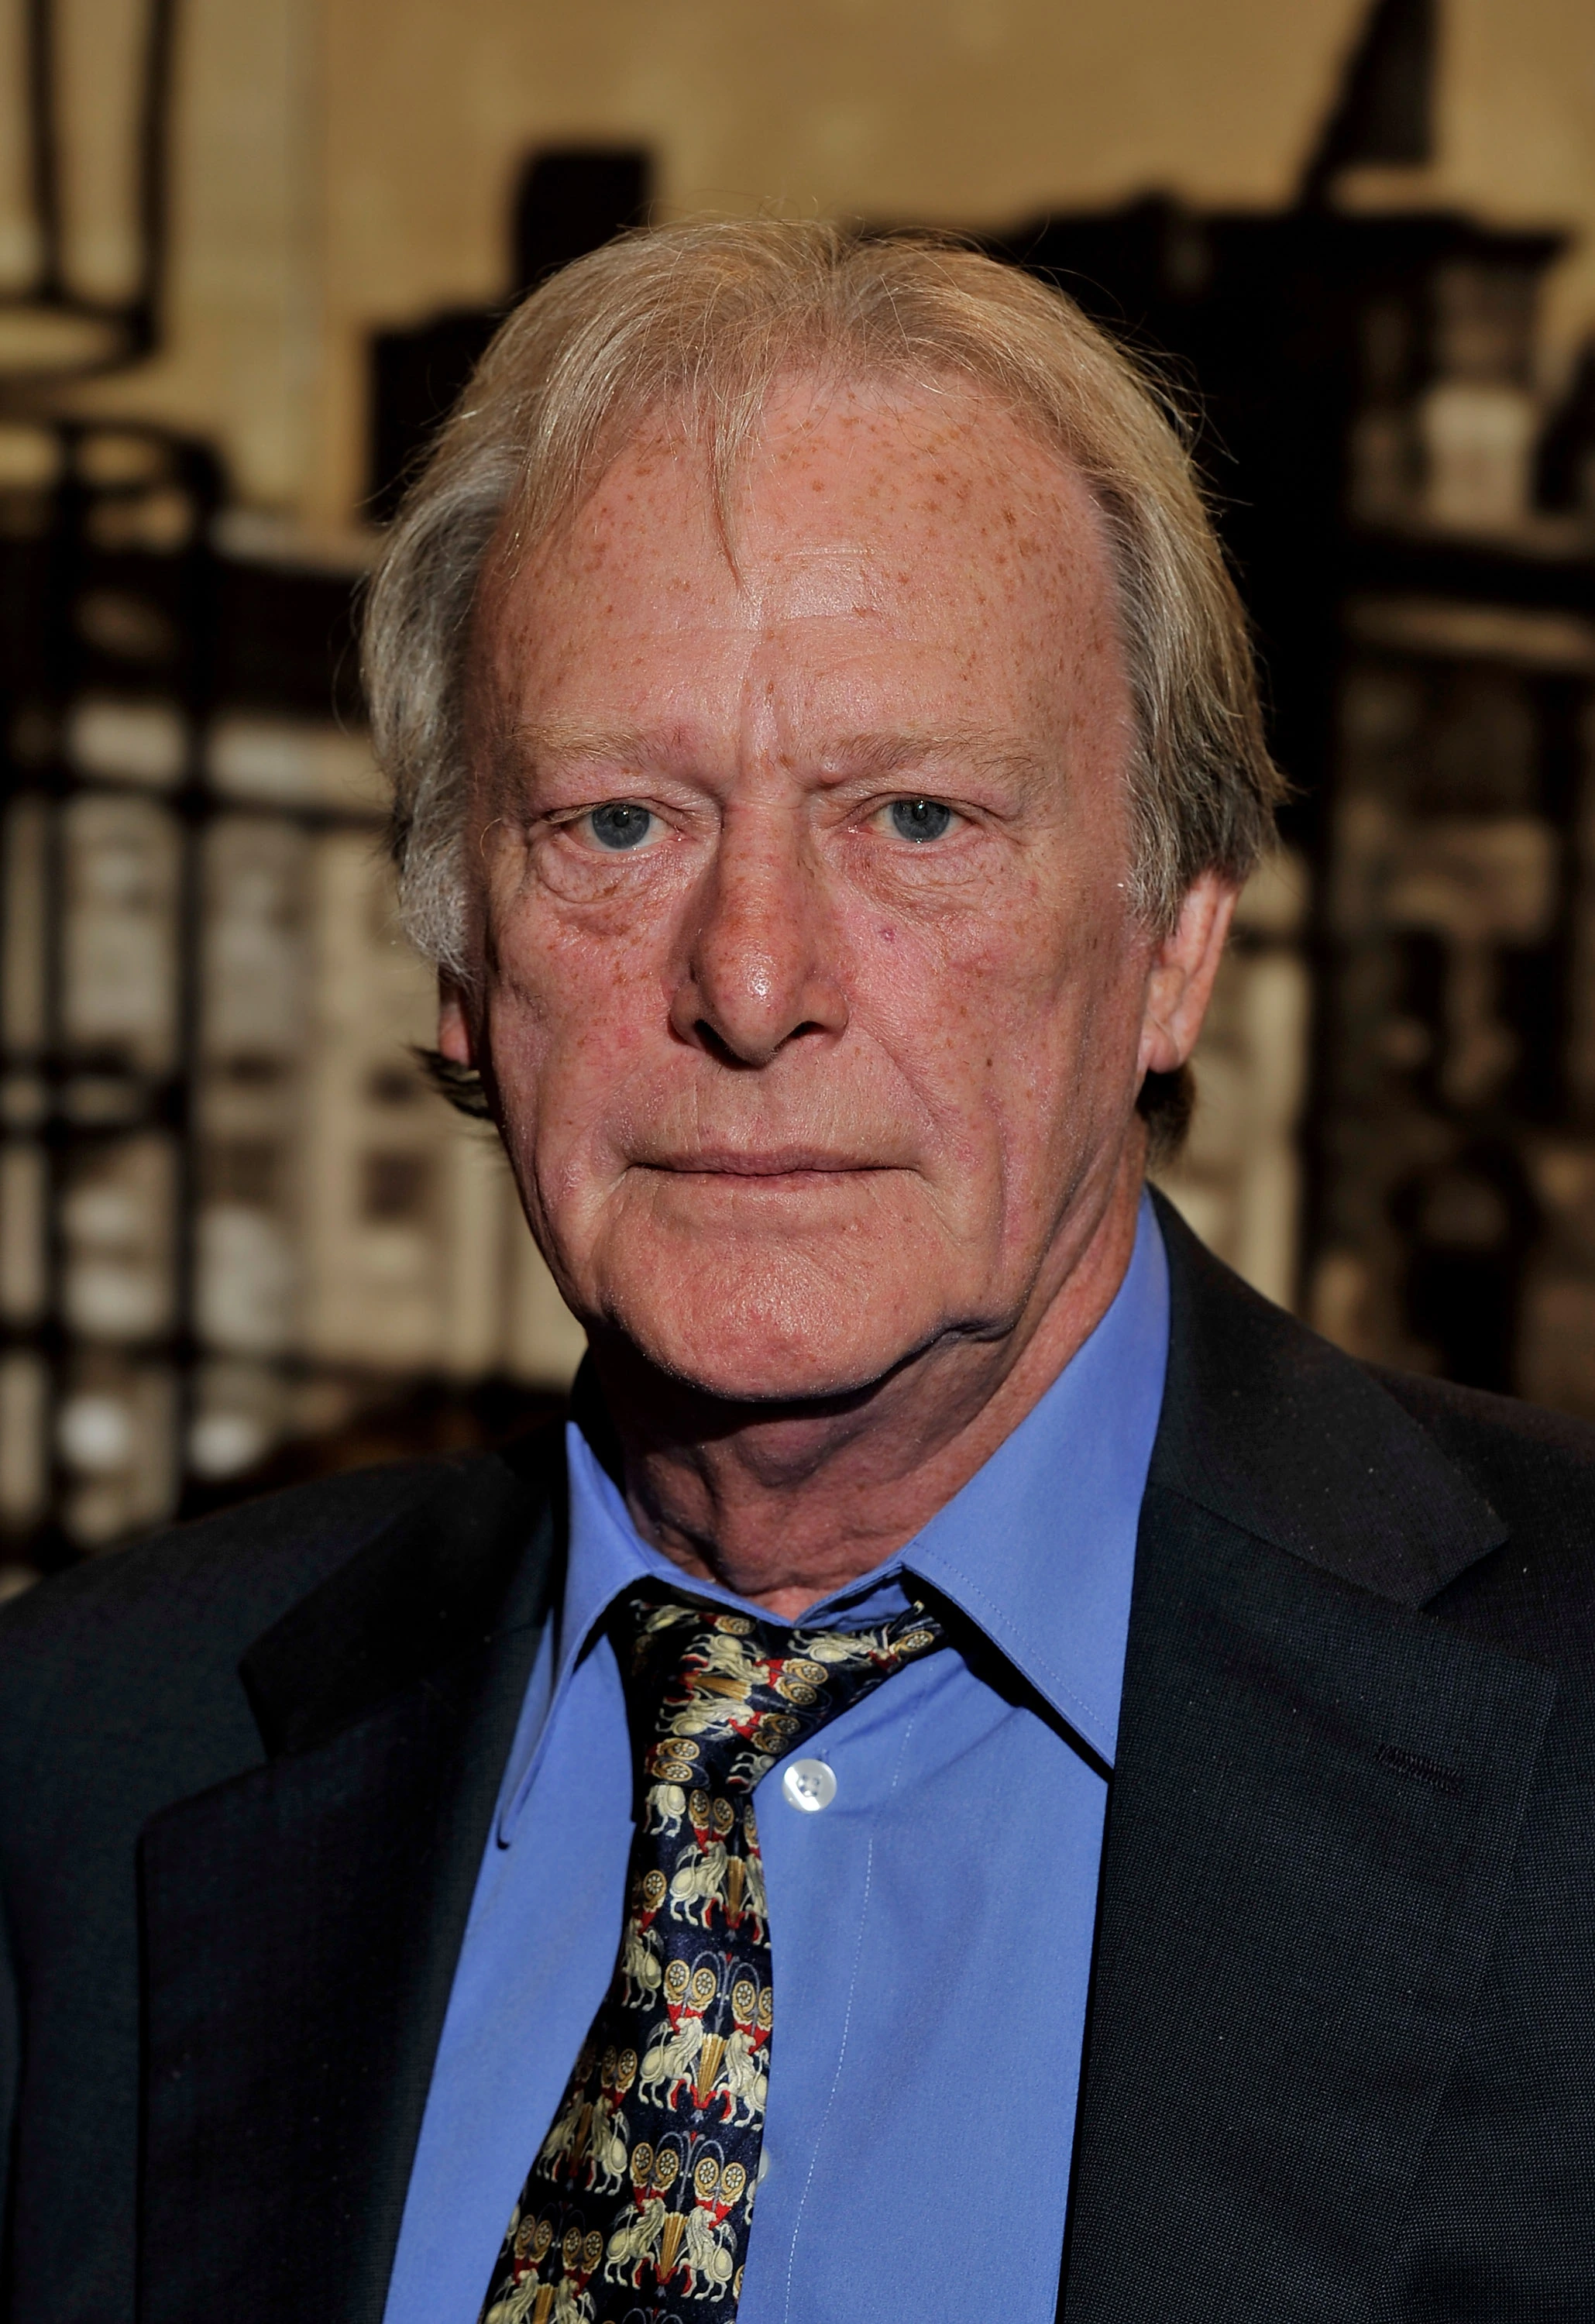 Dennis Waterman Second Wife: Who Is Patricia Maynard?